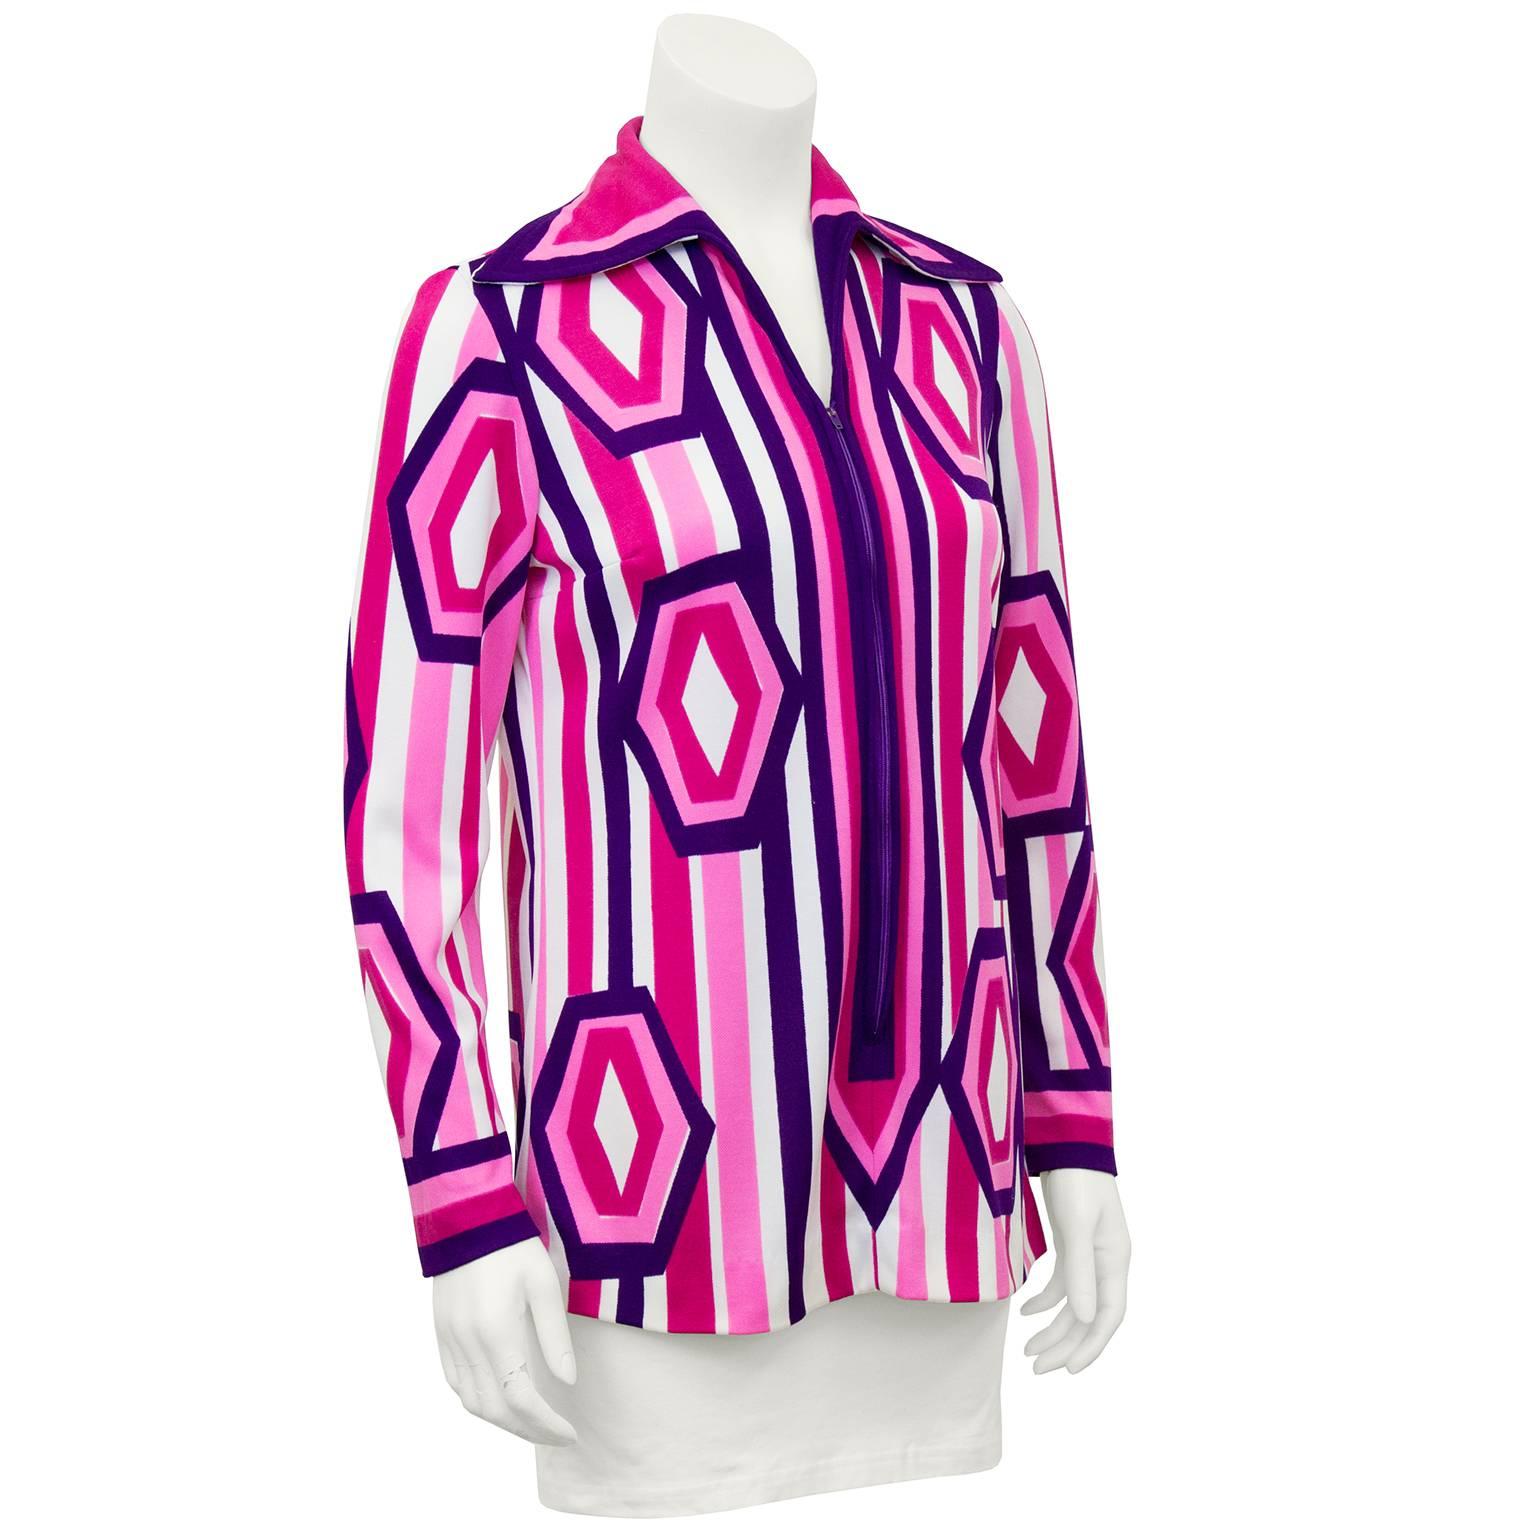 Amazing and unworn 1960's Vera Mod-Style top in bright pink, purple and white. Very graphic and eye catching. Oversized, exaggerated collar, purple zipper up front, and signed polyester fabric. Excellent vintage condition. Fits like a US 6. Great